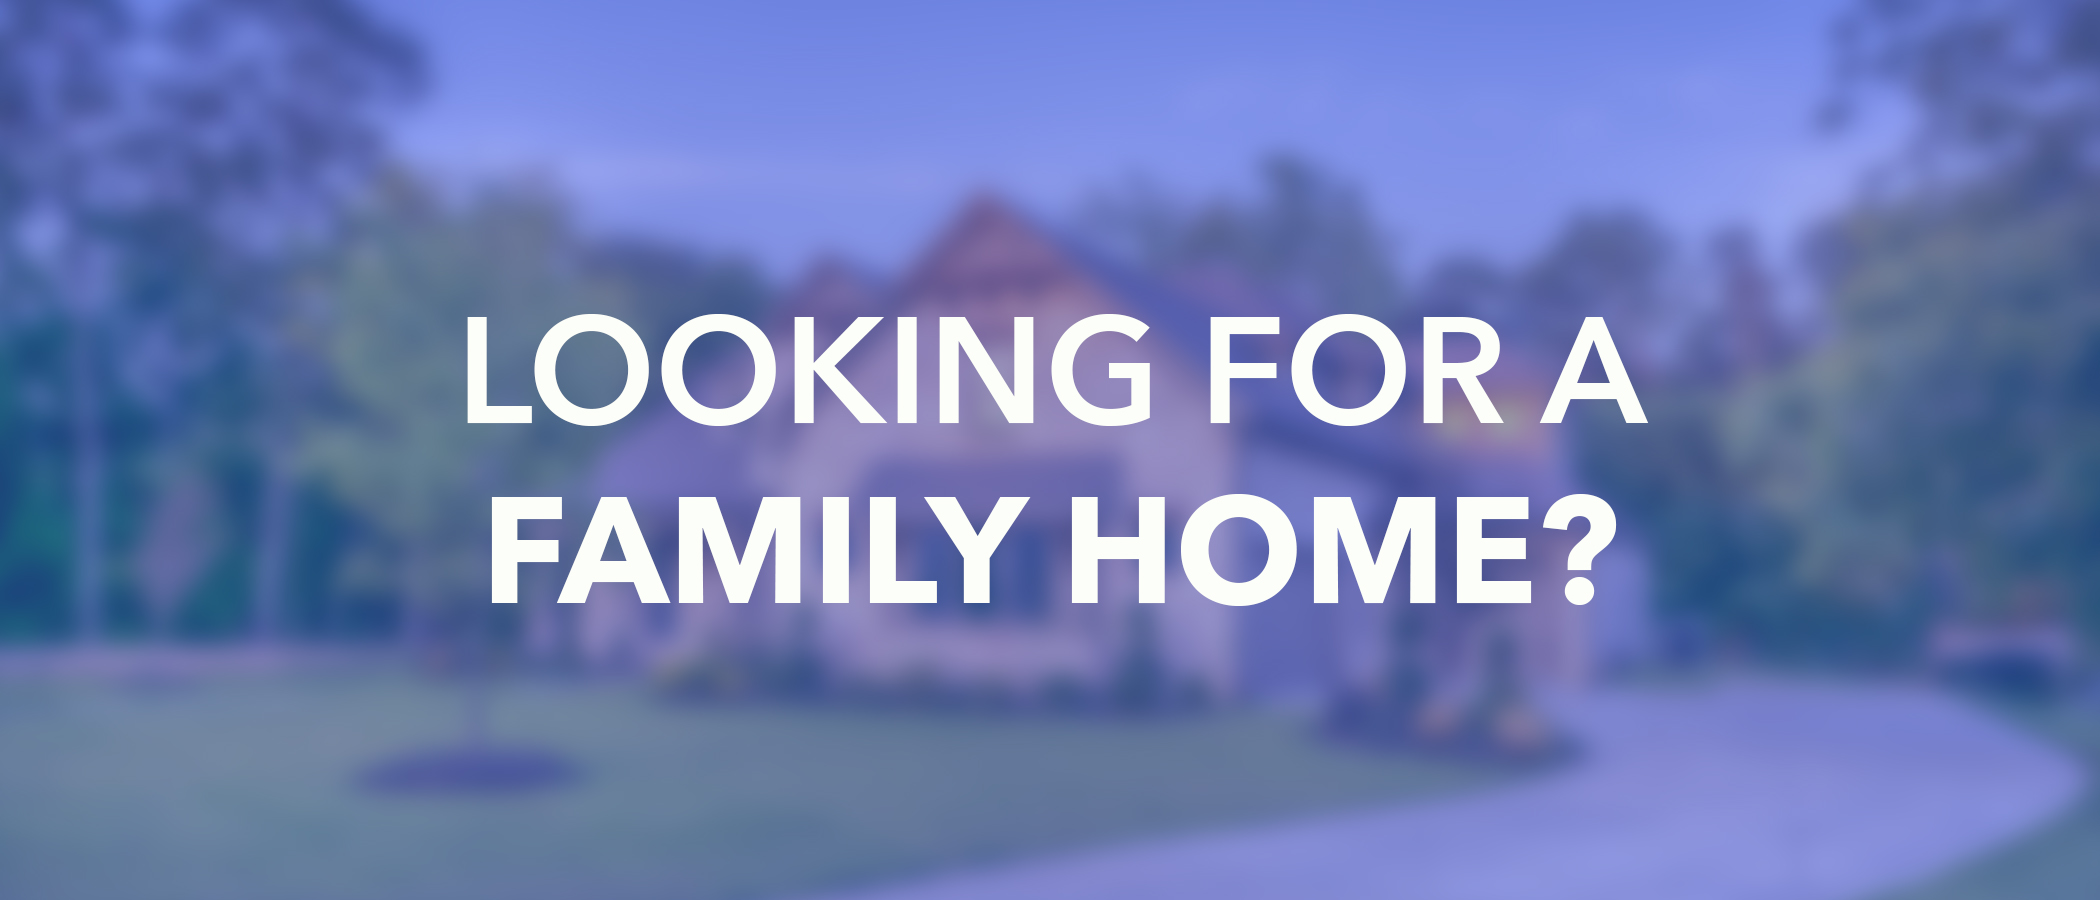 Looking For-Banner-family home